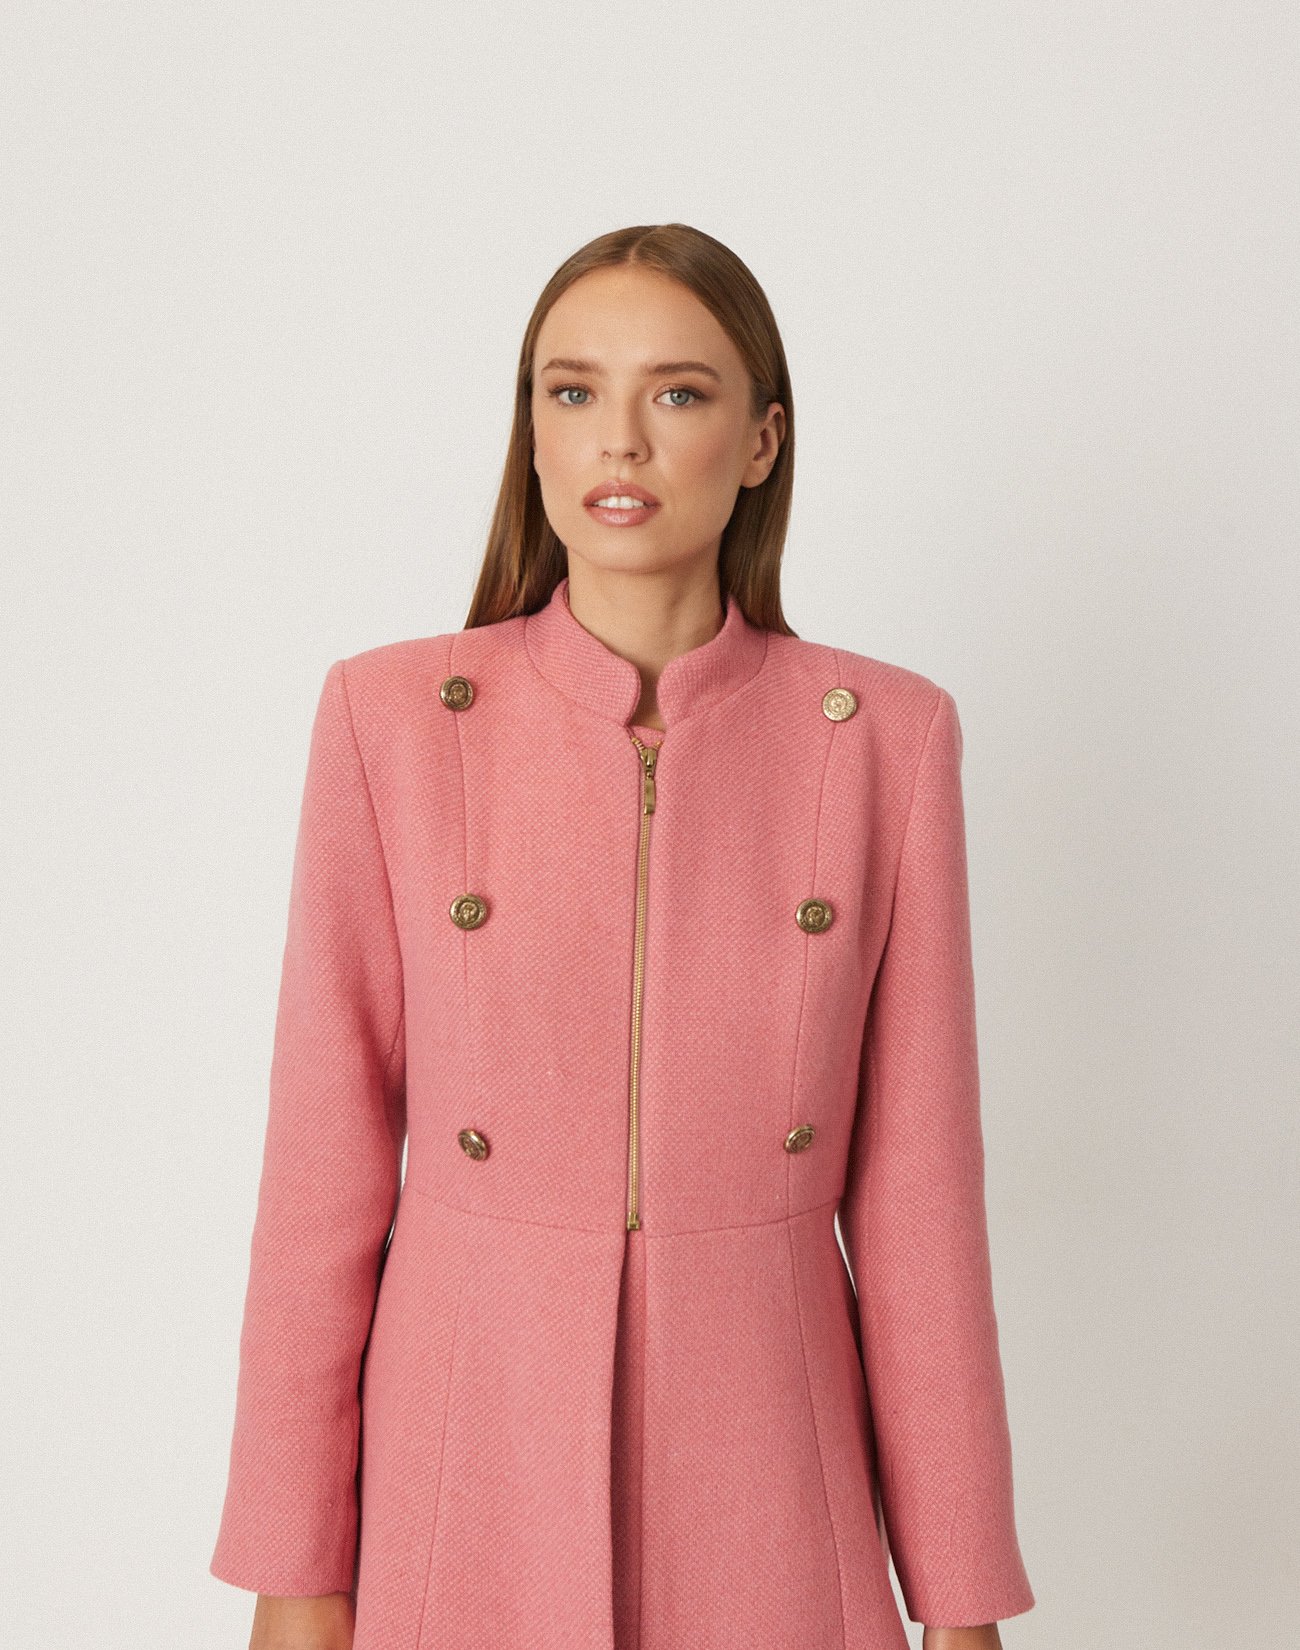 Coat with bow